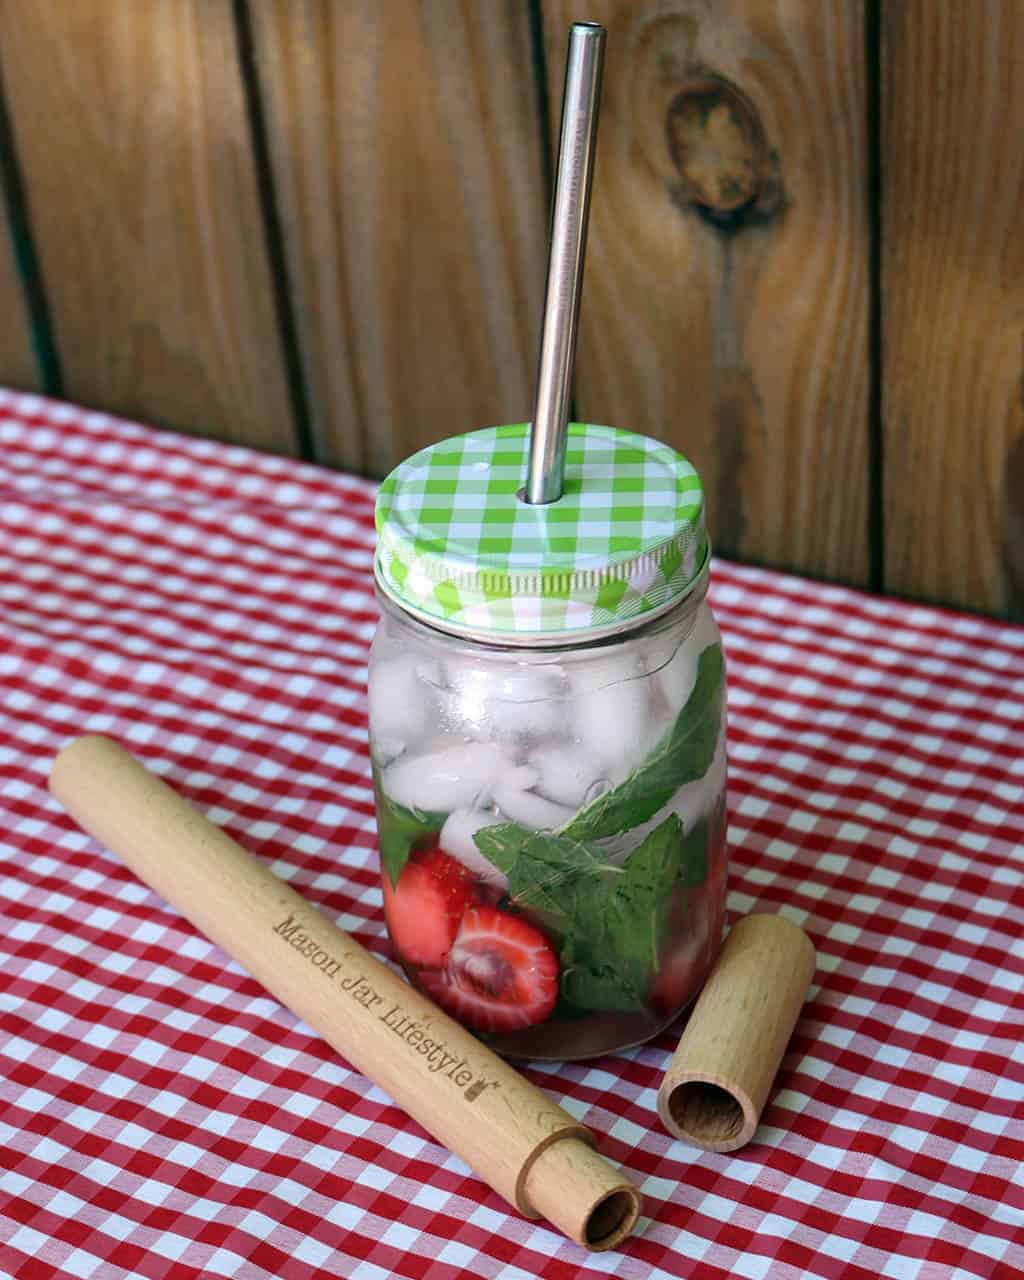 wood-straw-carrying-case-beech-food-safe-oil-mason-jar-lifestyle-pint-jar-safer-stainless-steel-straw-green-gingham-lid-mint-strawberries